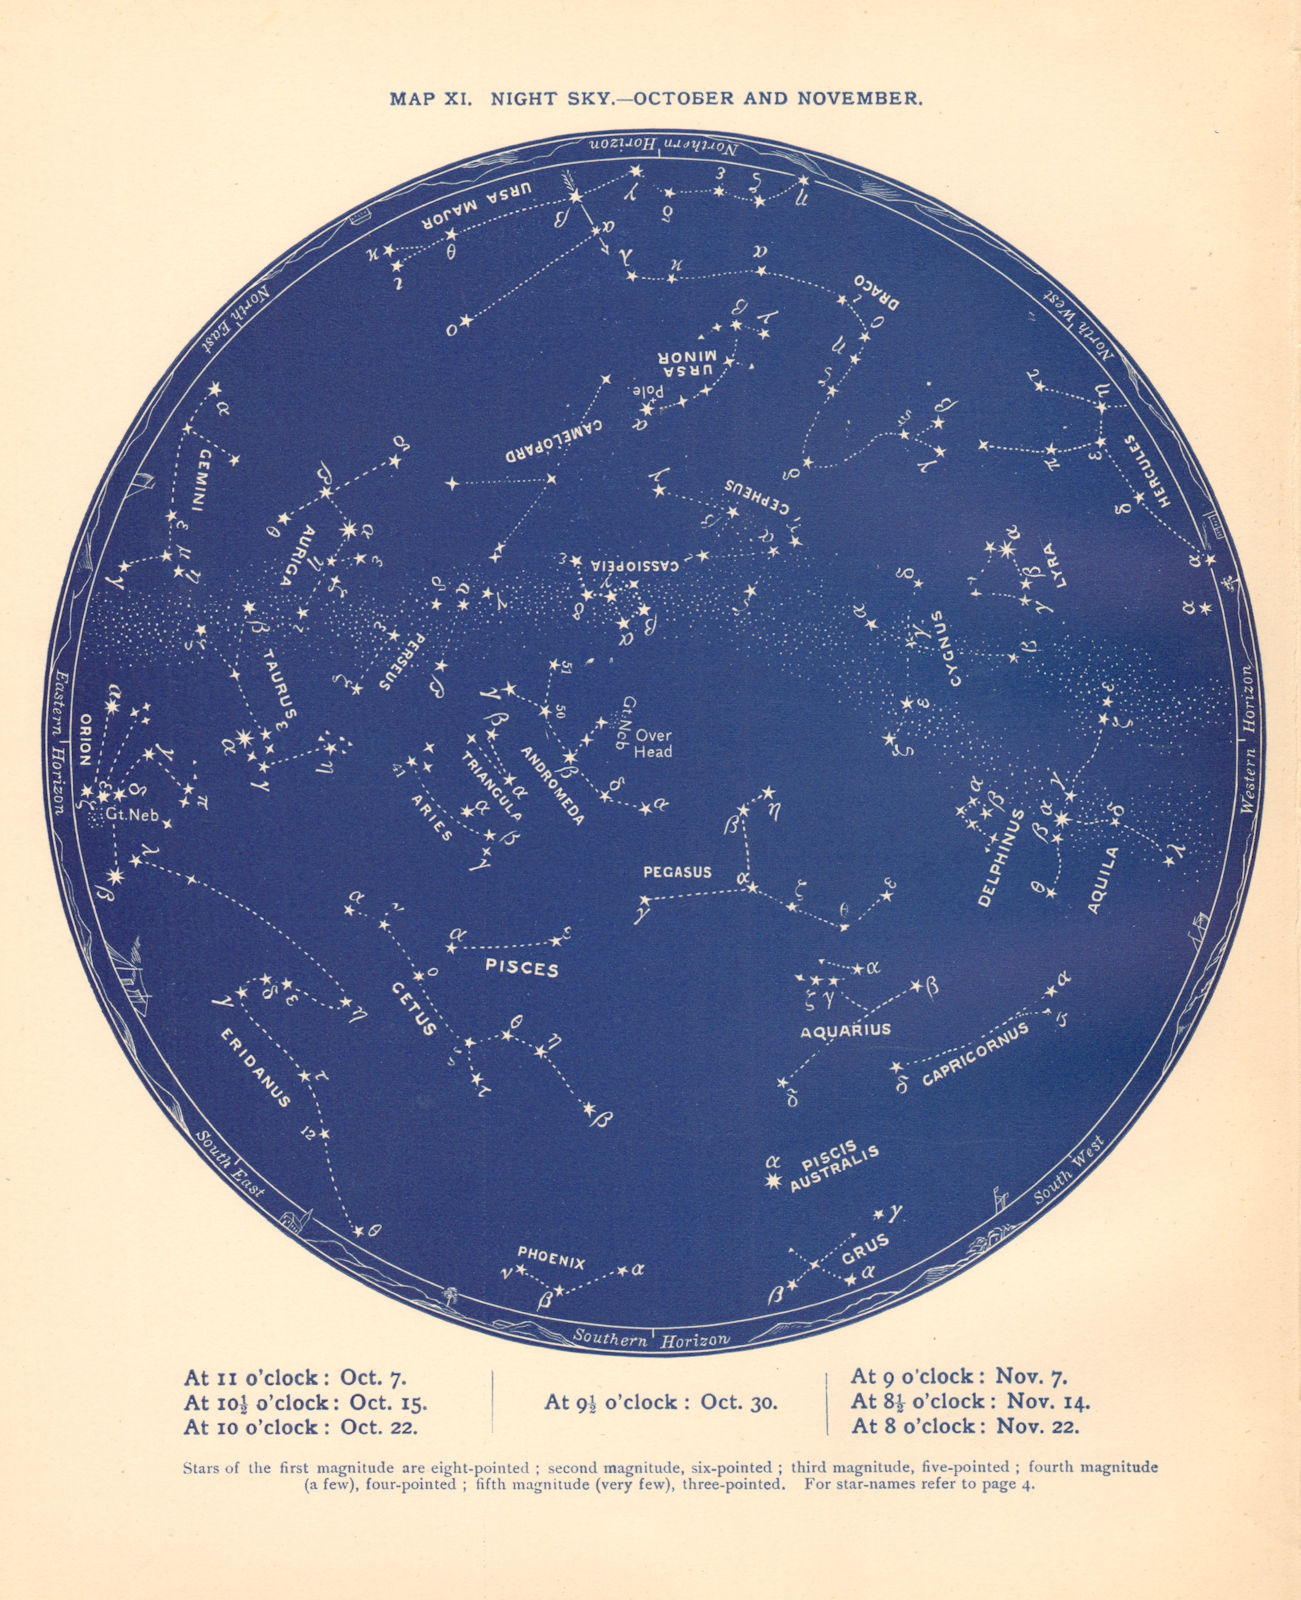 STAR MAP XI. The Night Sky. October-November. Astronomy. PROCTOR 1887 old